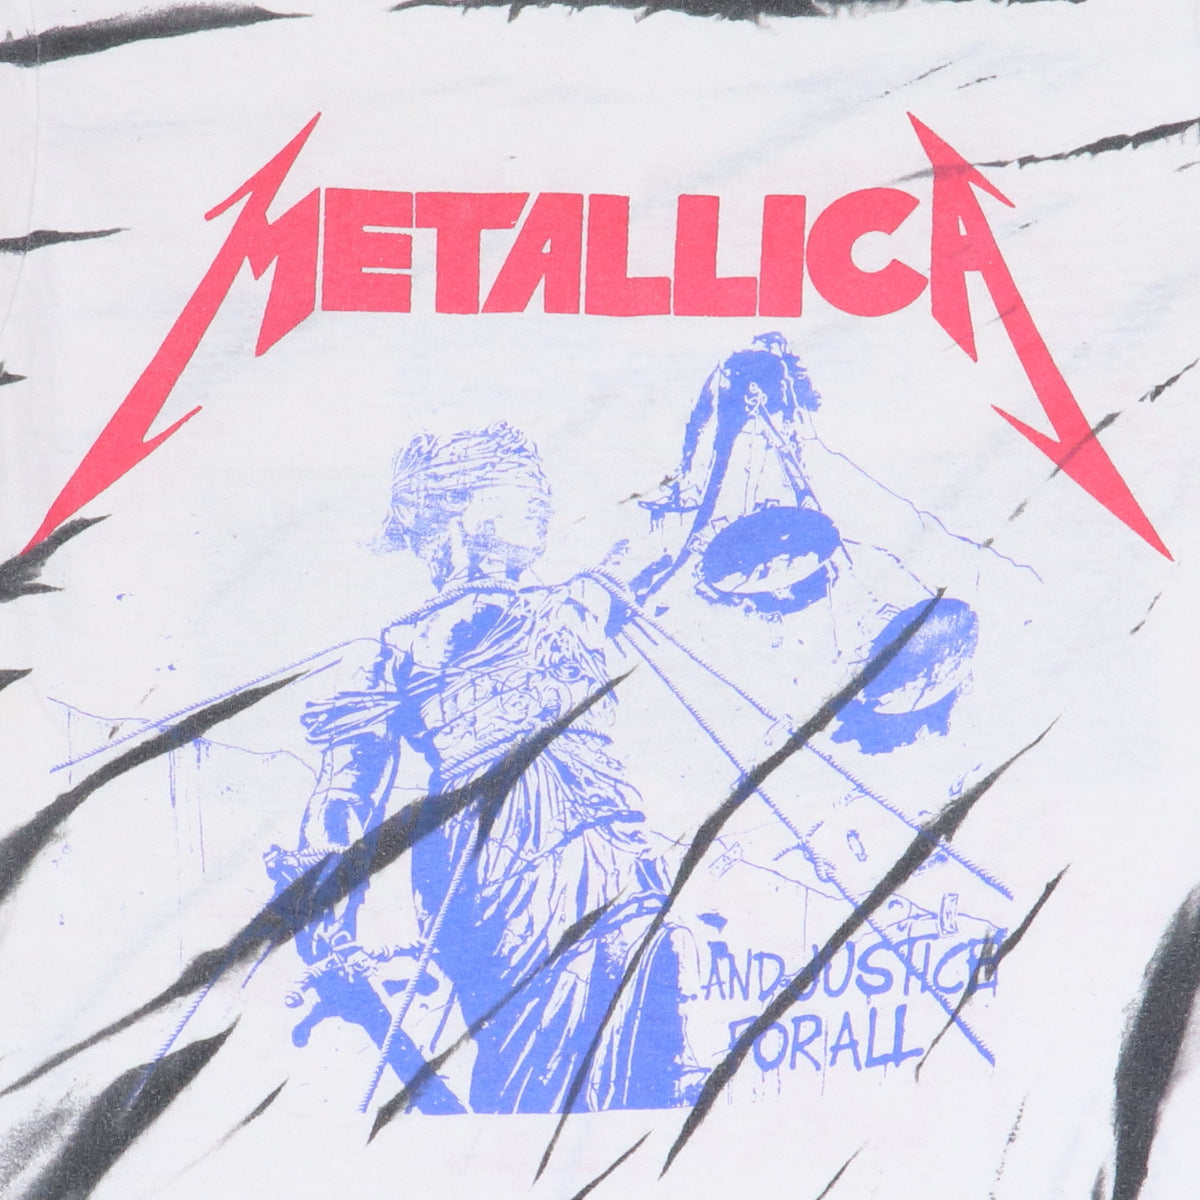 1989 Metallica And Justice For All Tour Shirt